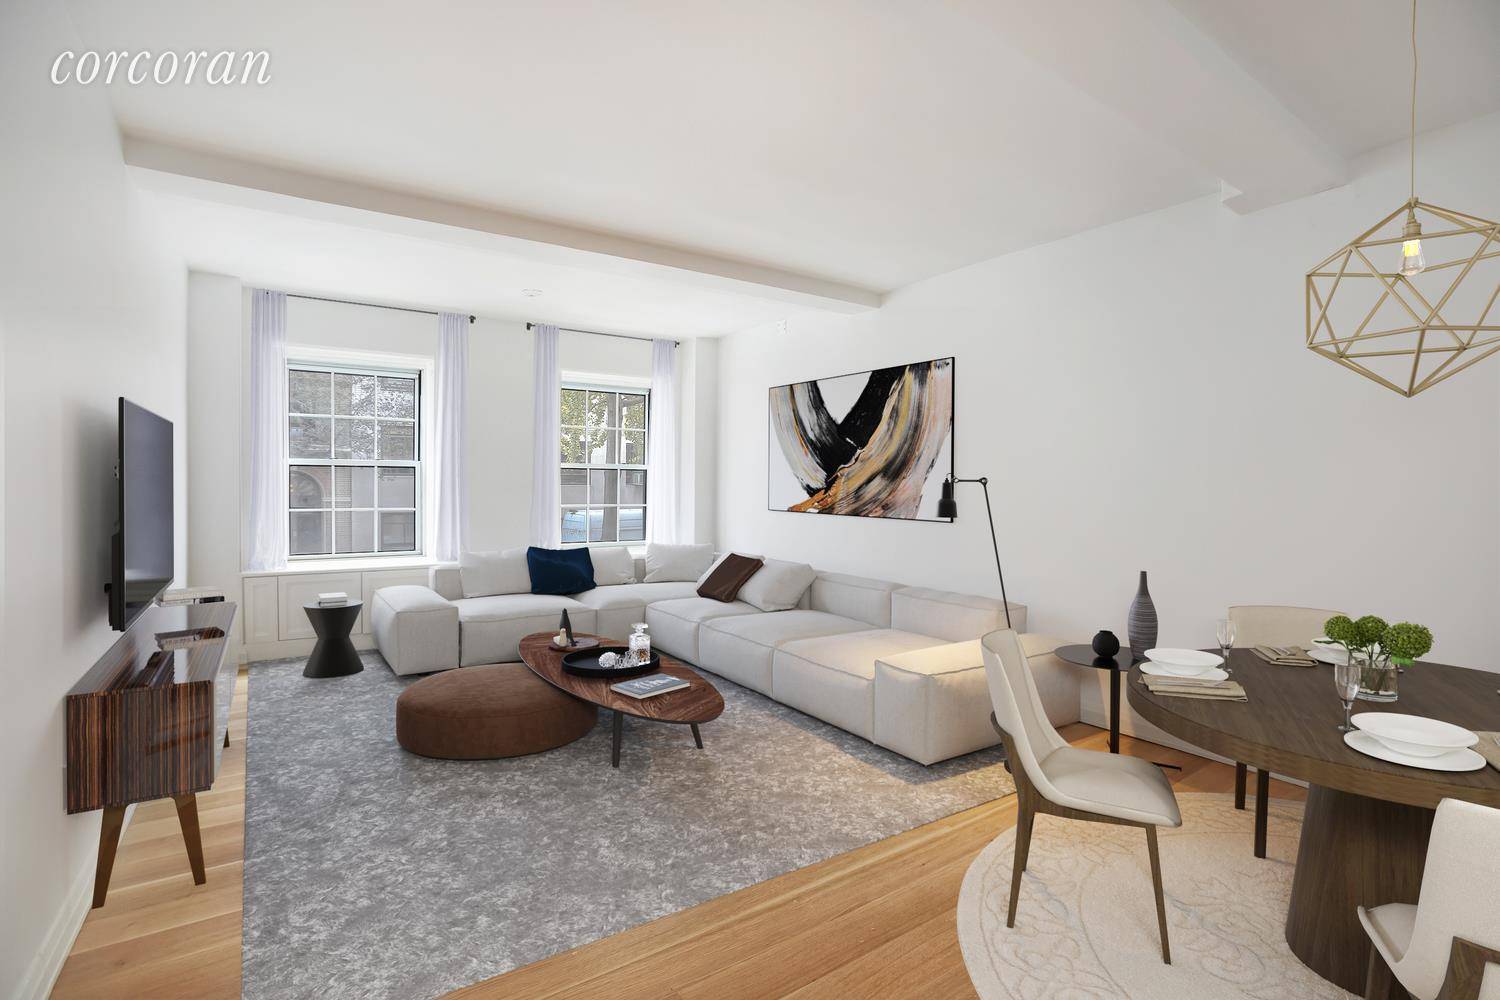 Price Adjustment ! Charmingly Situated Condominium on Landmarked East 88th StreetGraciously scaled with pre war proportions, Residence 2C at 12 East 88th Street offers two bedrooms and two and a ...